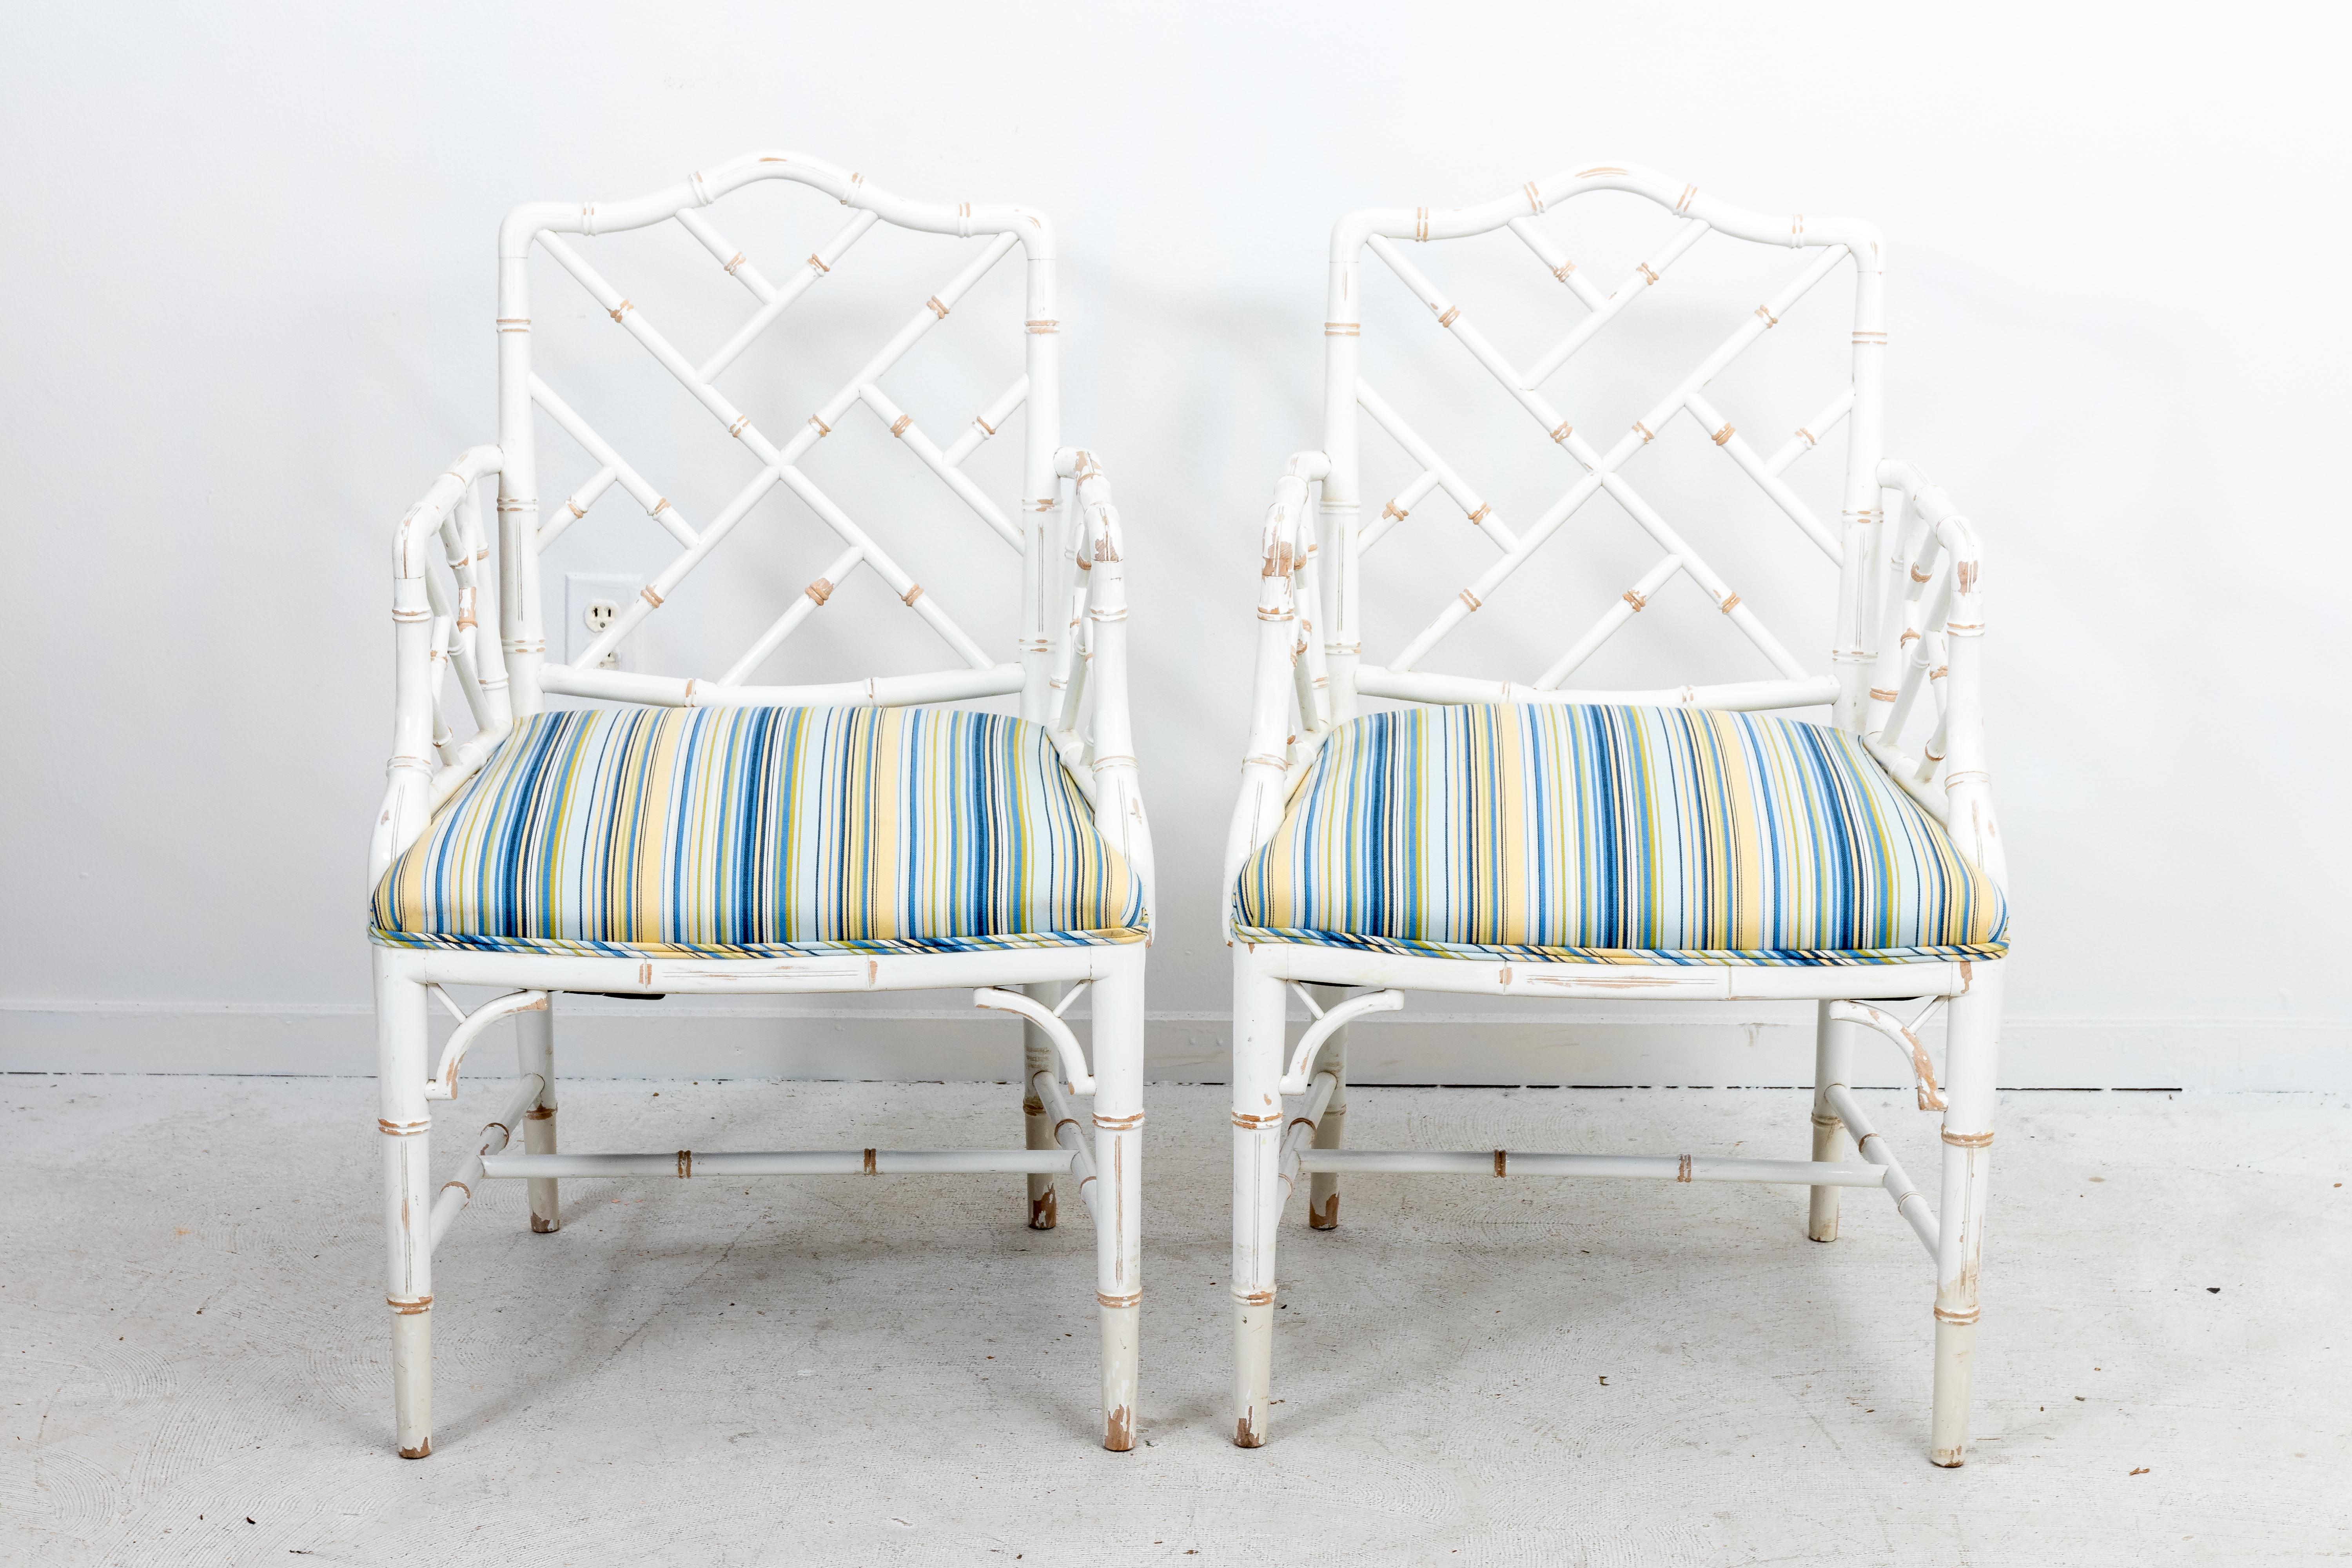 Vintage set of 4 Hollywood Regency faux bamboo armchairs. Distressed painted finish made by Century Furniture in North Carolina. Clean upholstery. Note wear from age and use.